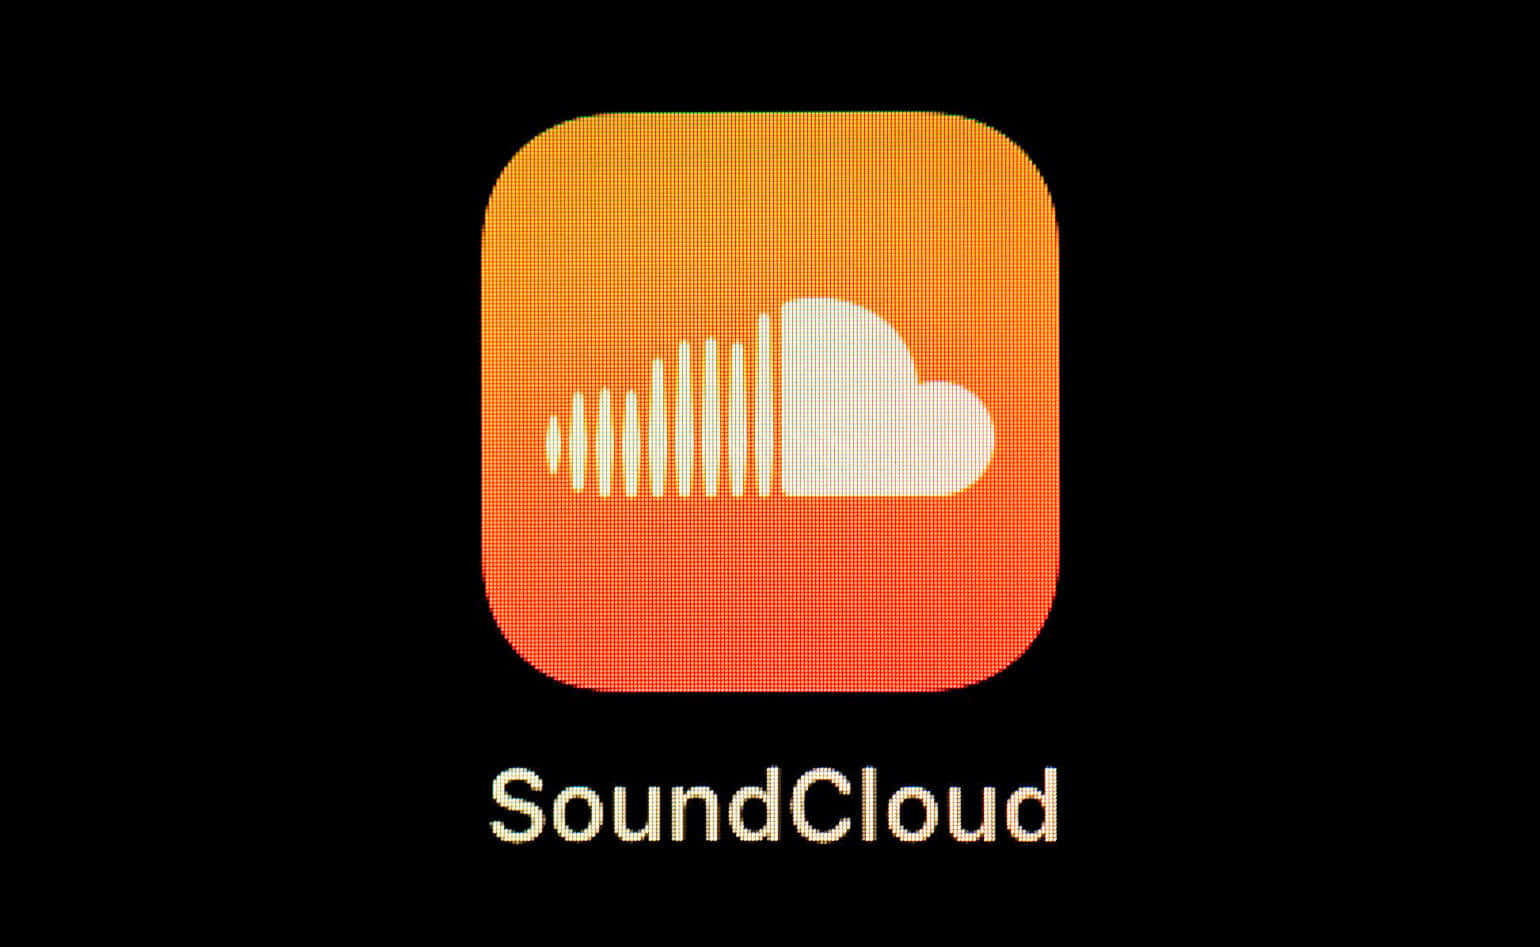 Find your favorite music on Soundcloud